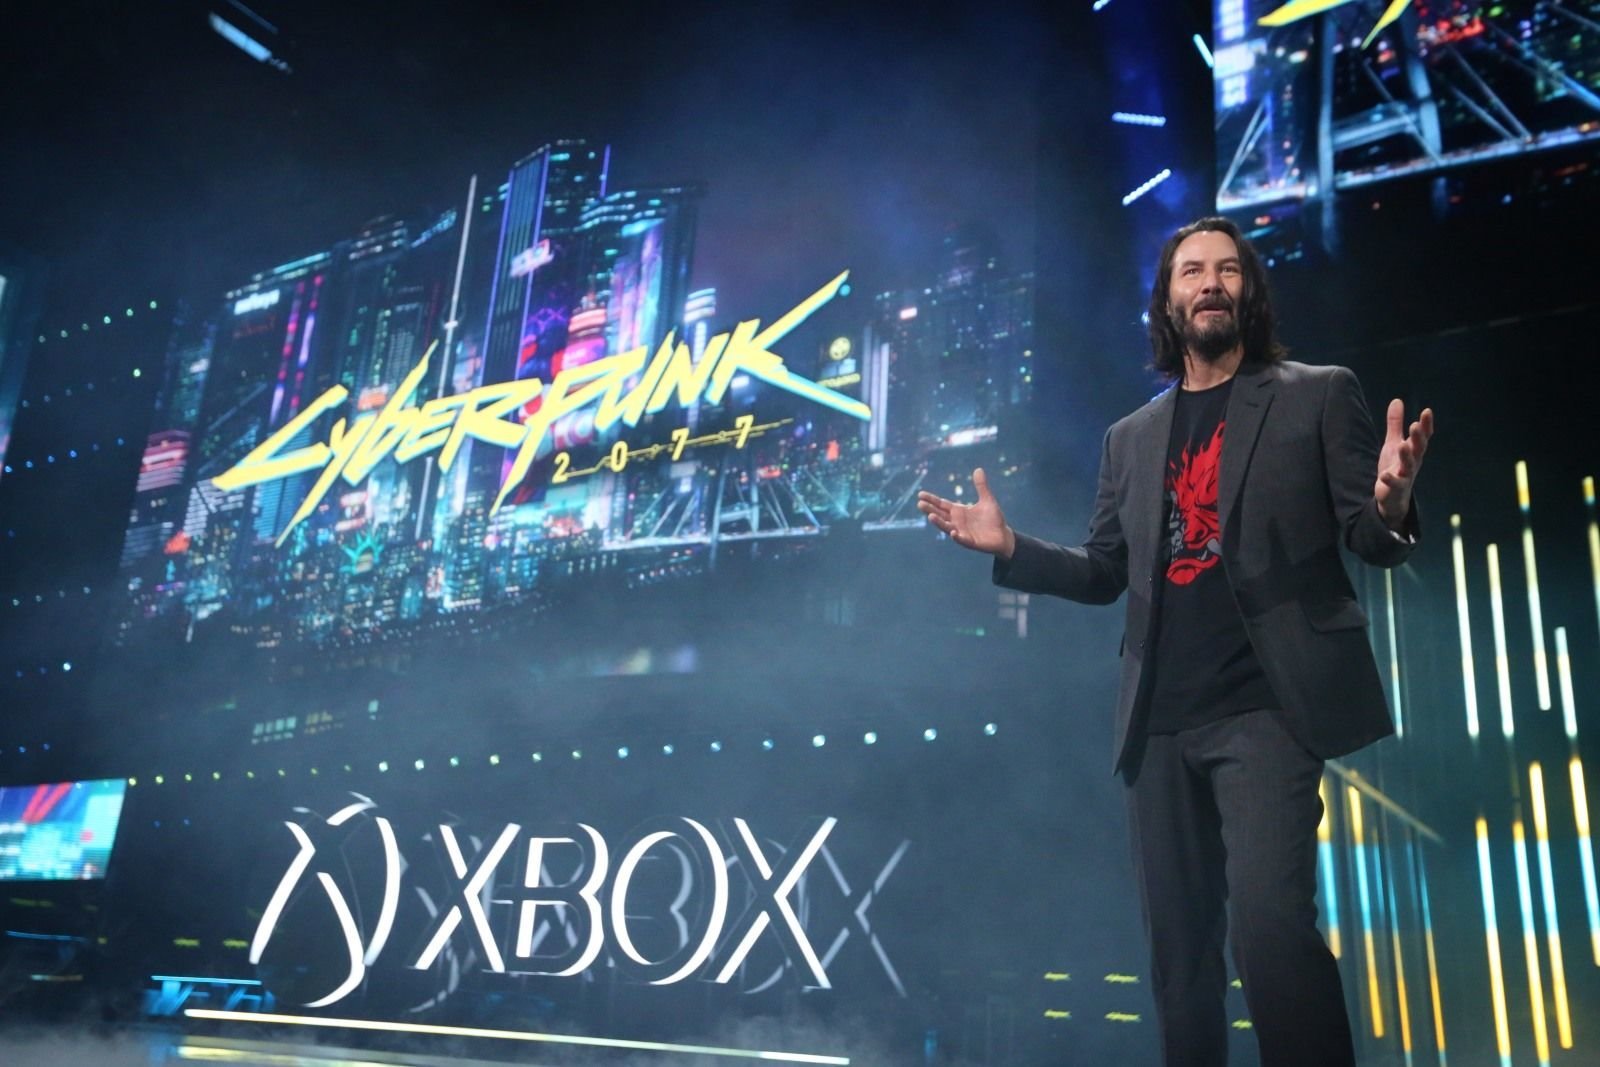 Reeves' appearance made many fans very happy (Photo: Casey Rodgers/Invision for Xbox/AP Images)